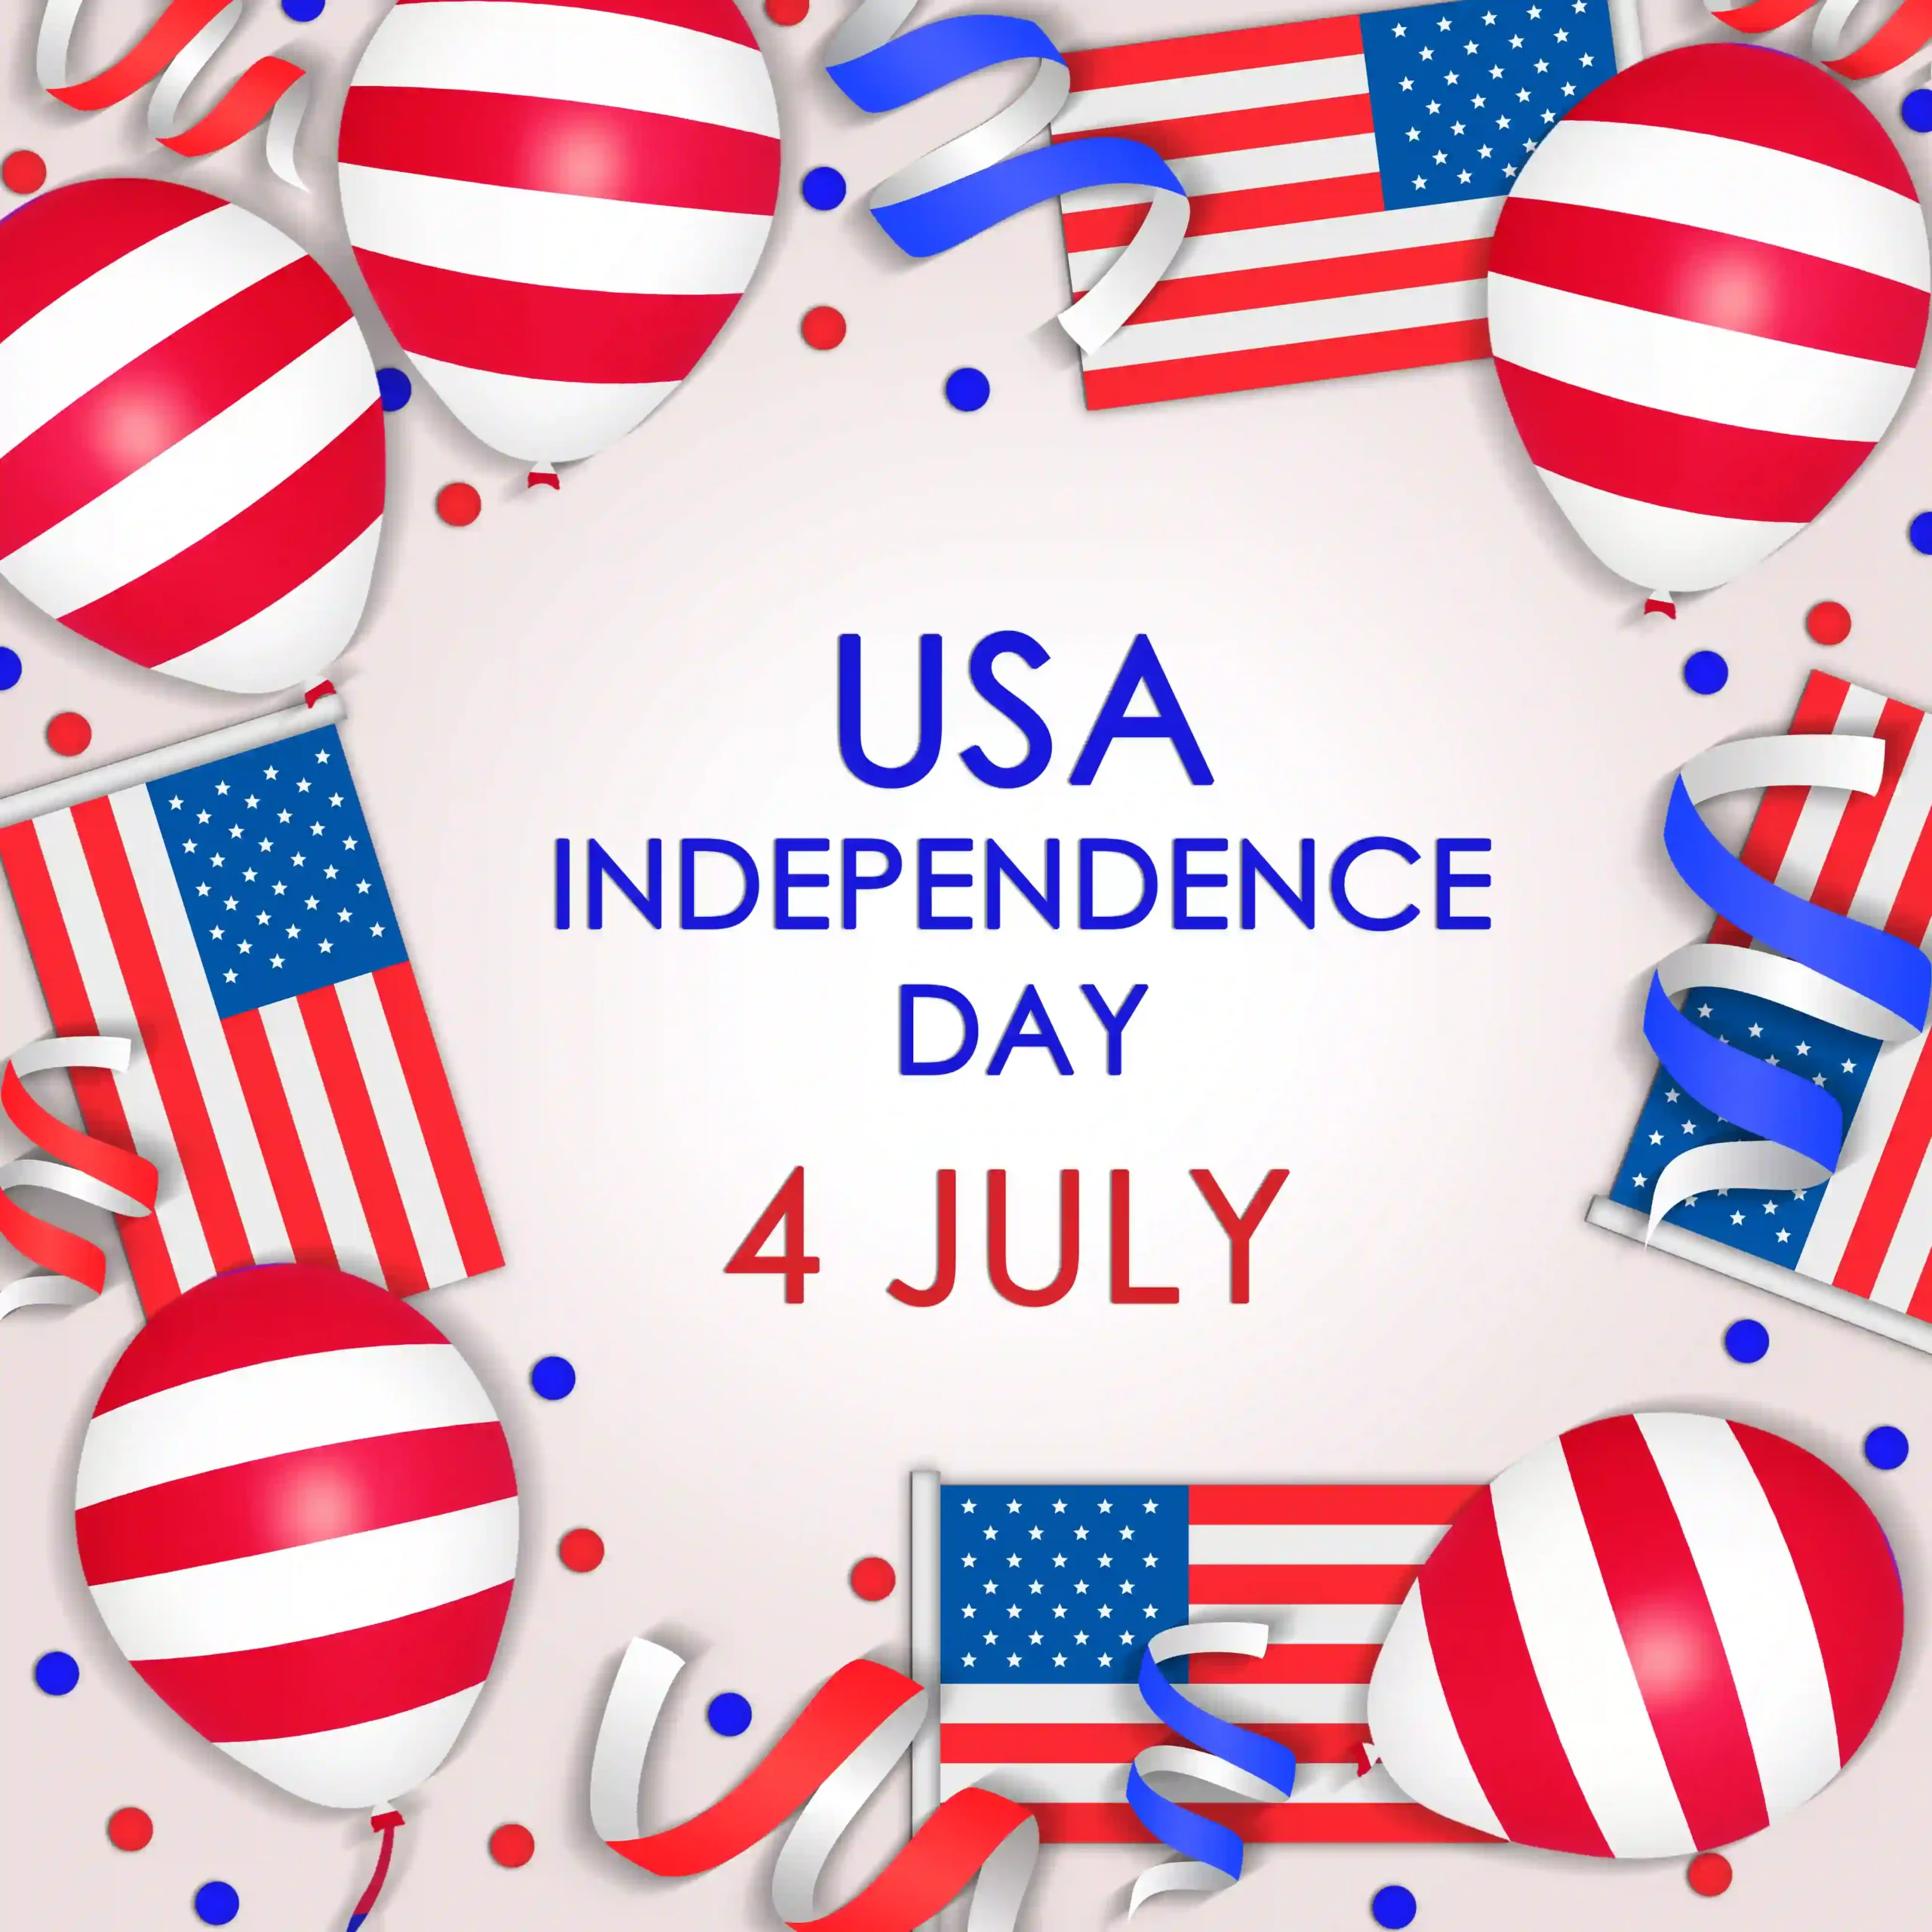 USA Independence Day 4 July PSD Free Download